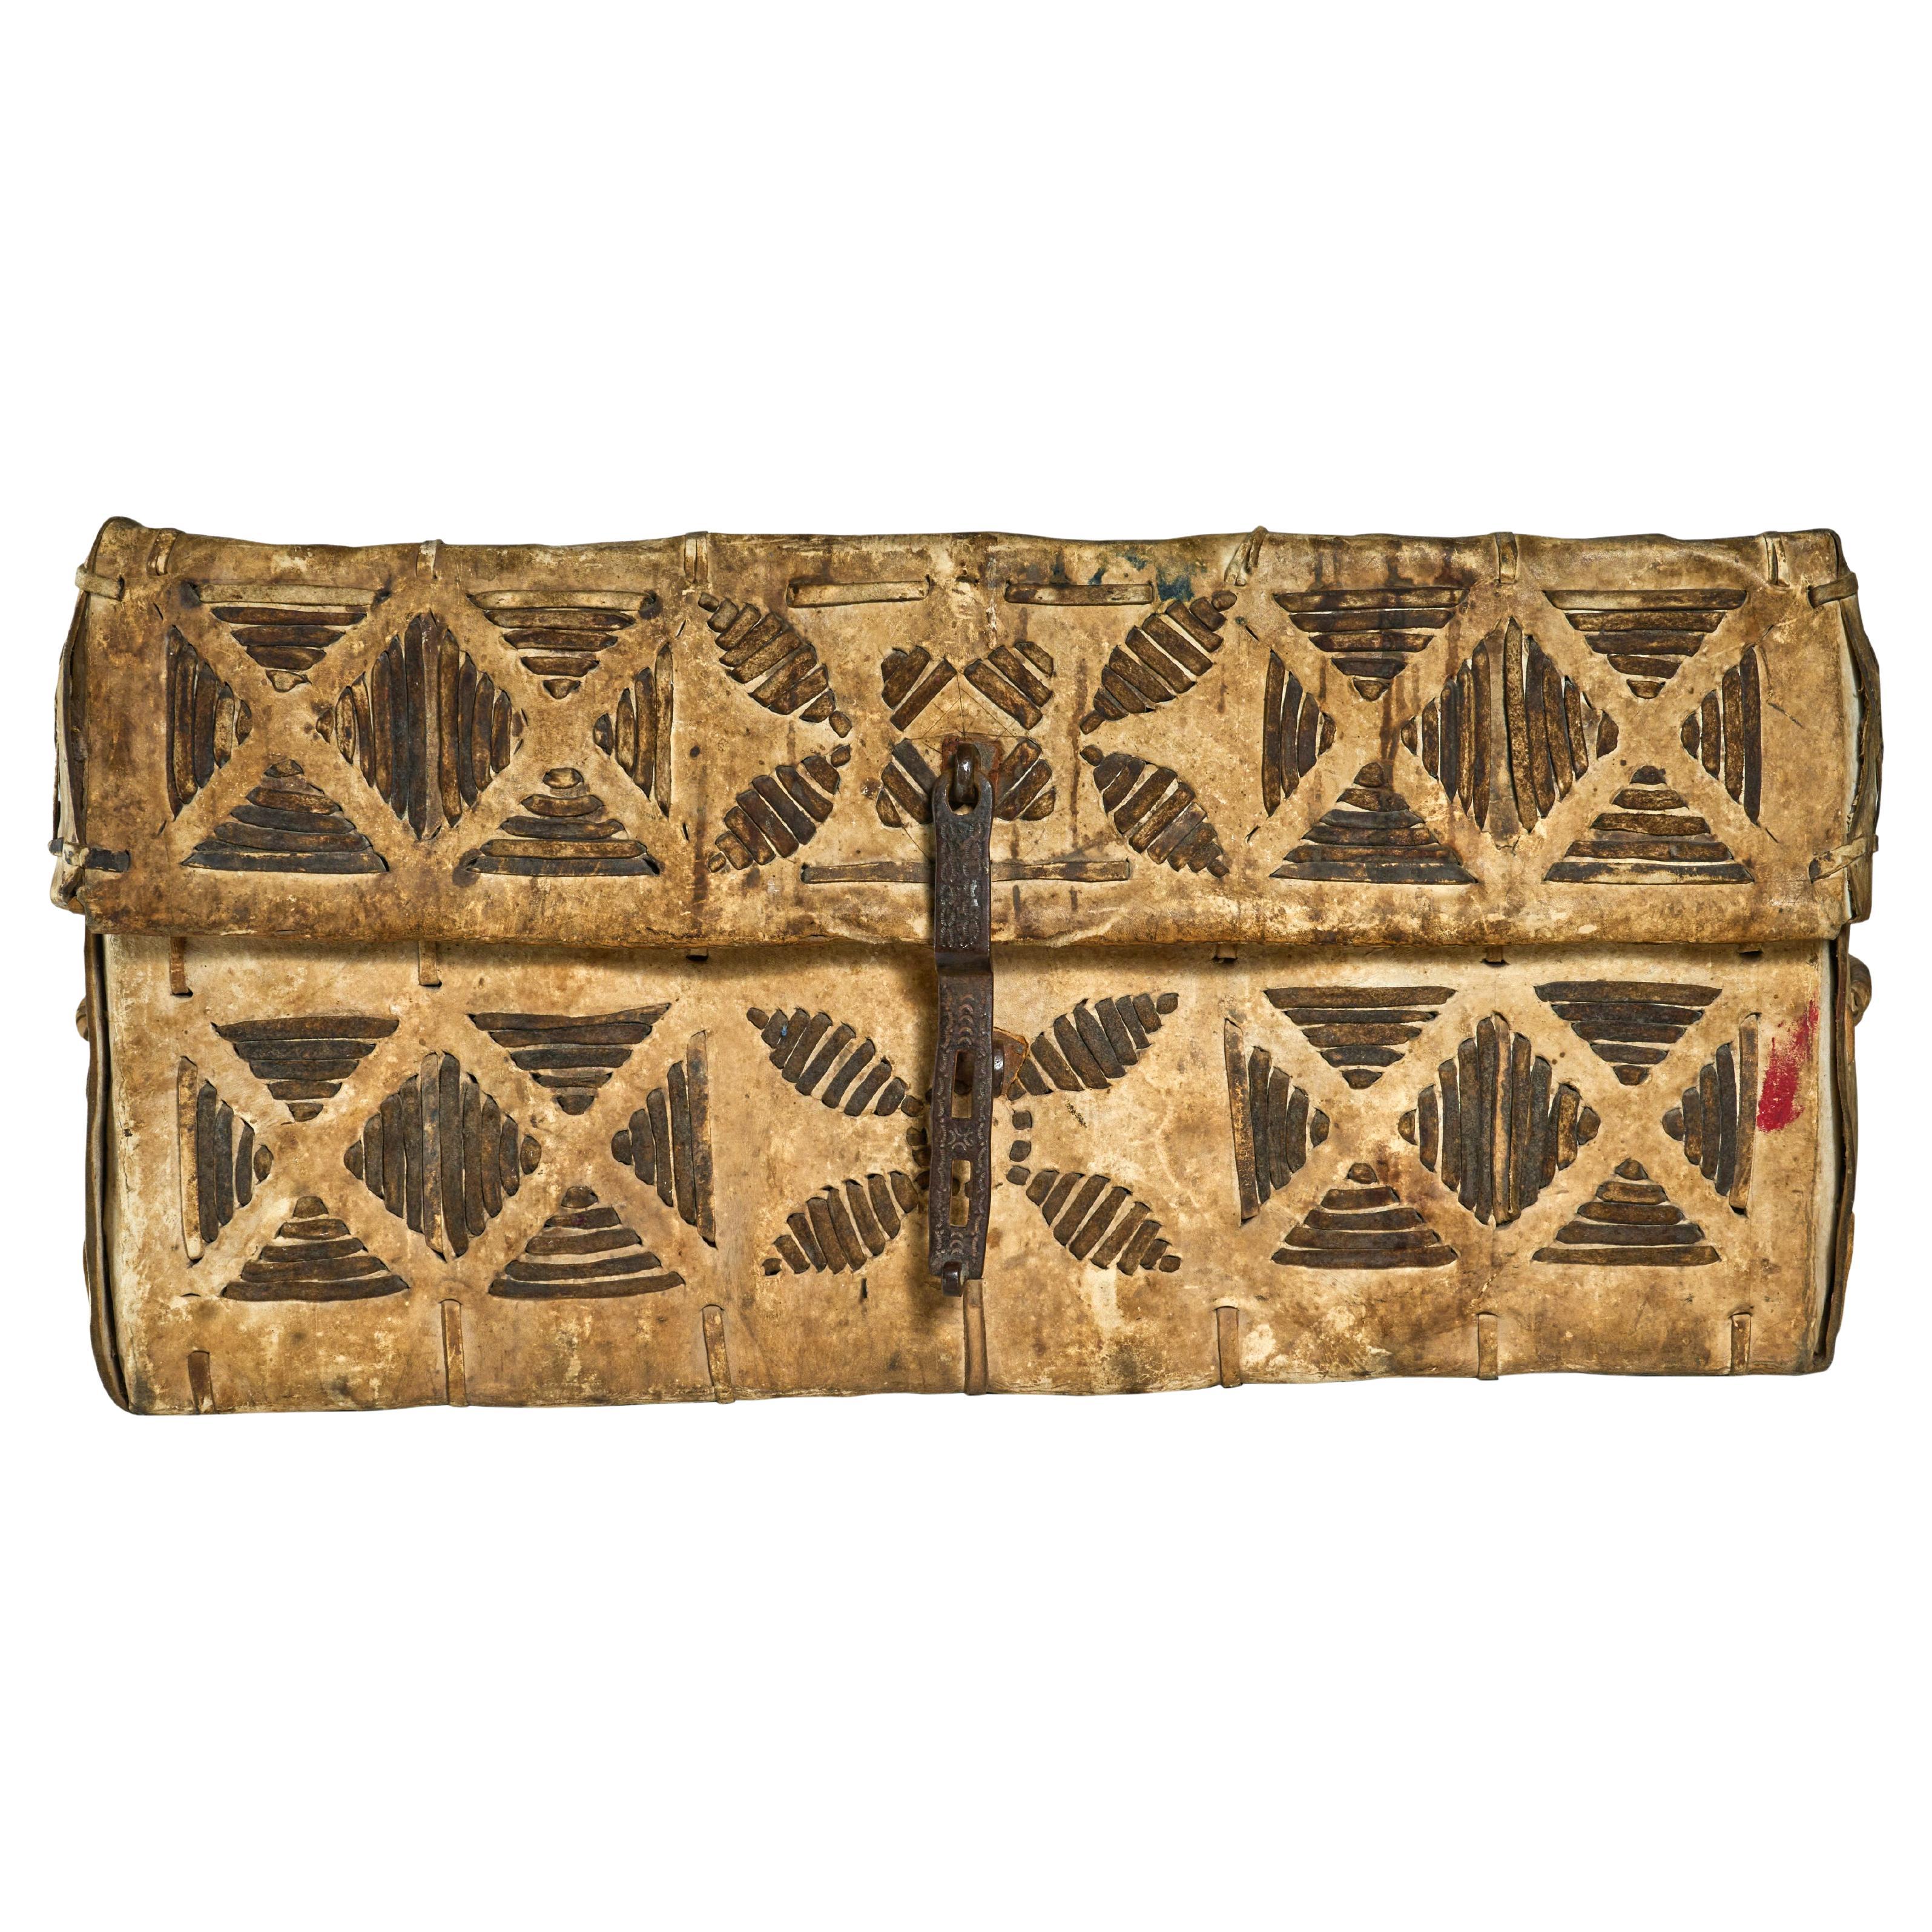 Large hide trunk with decorative stitching from the frontier region of Argentina. Made by gauchos. Great style and quality.
